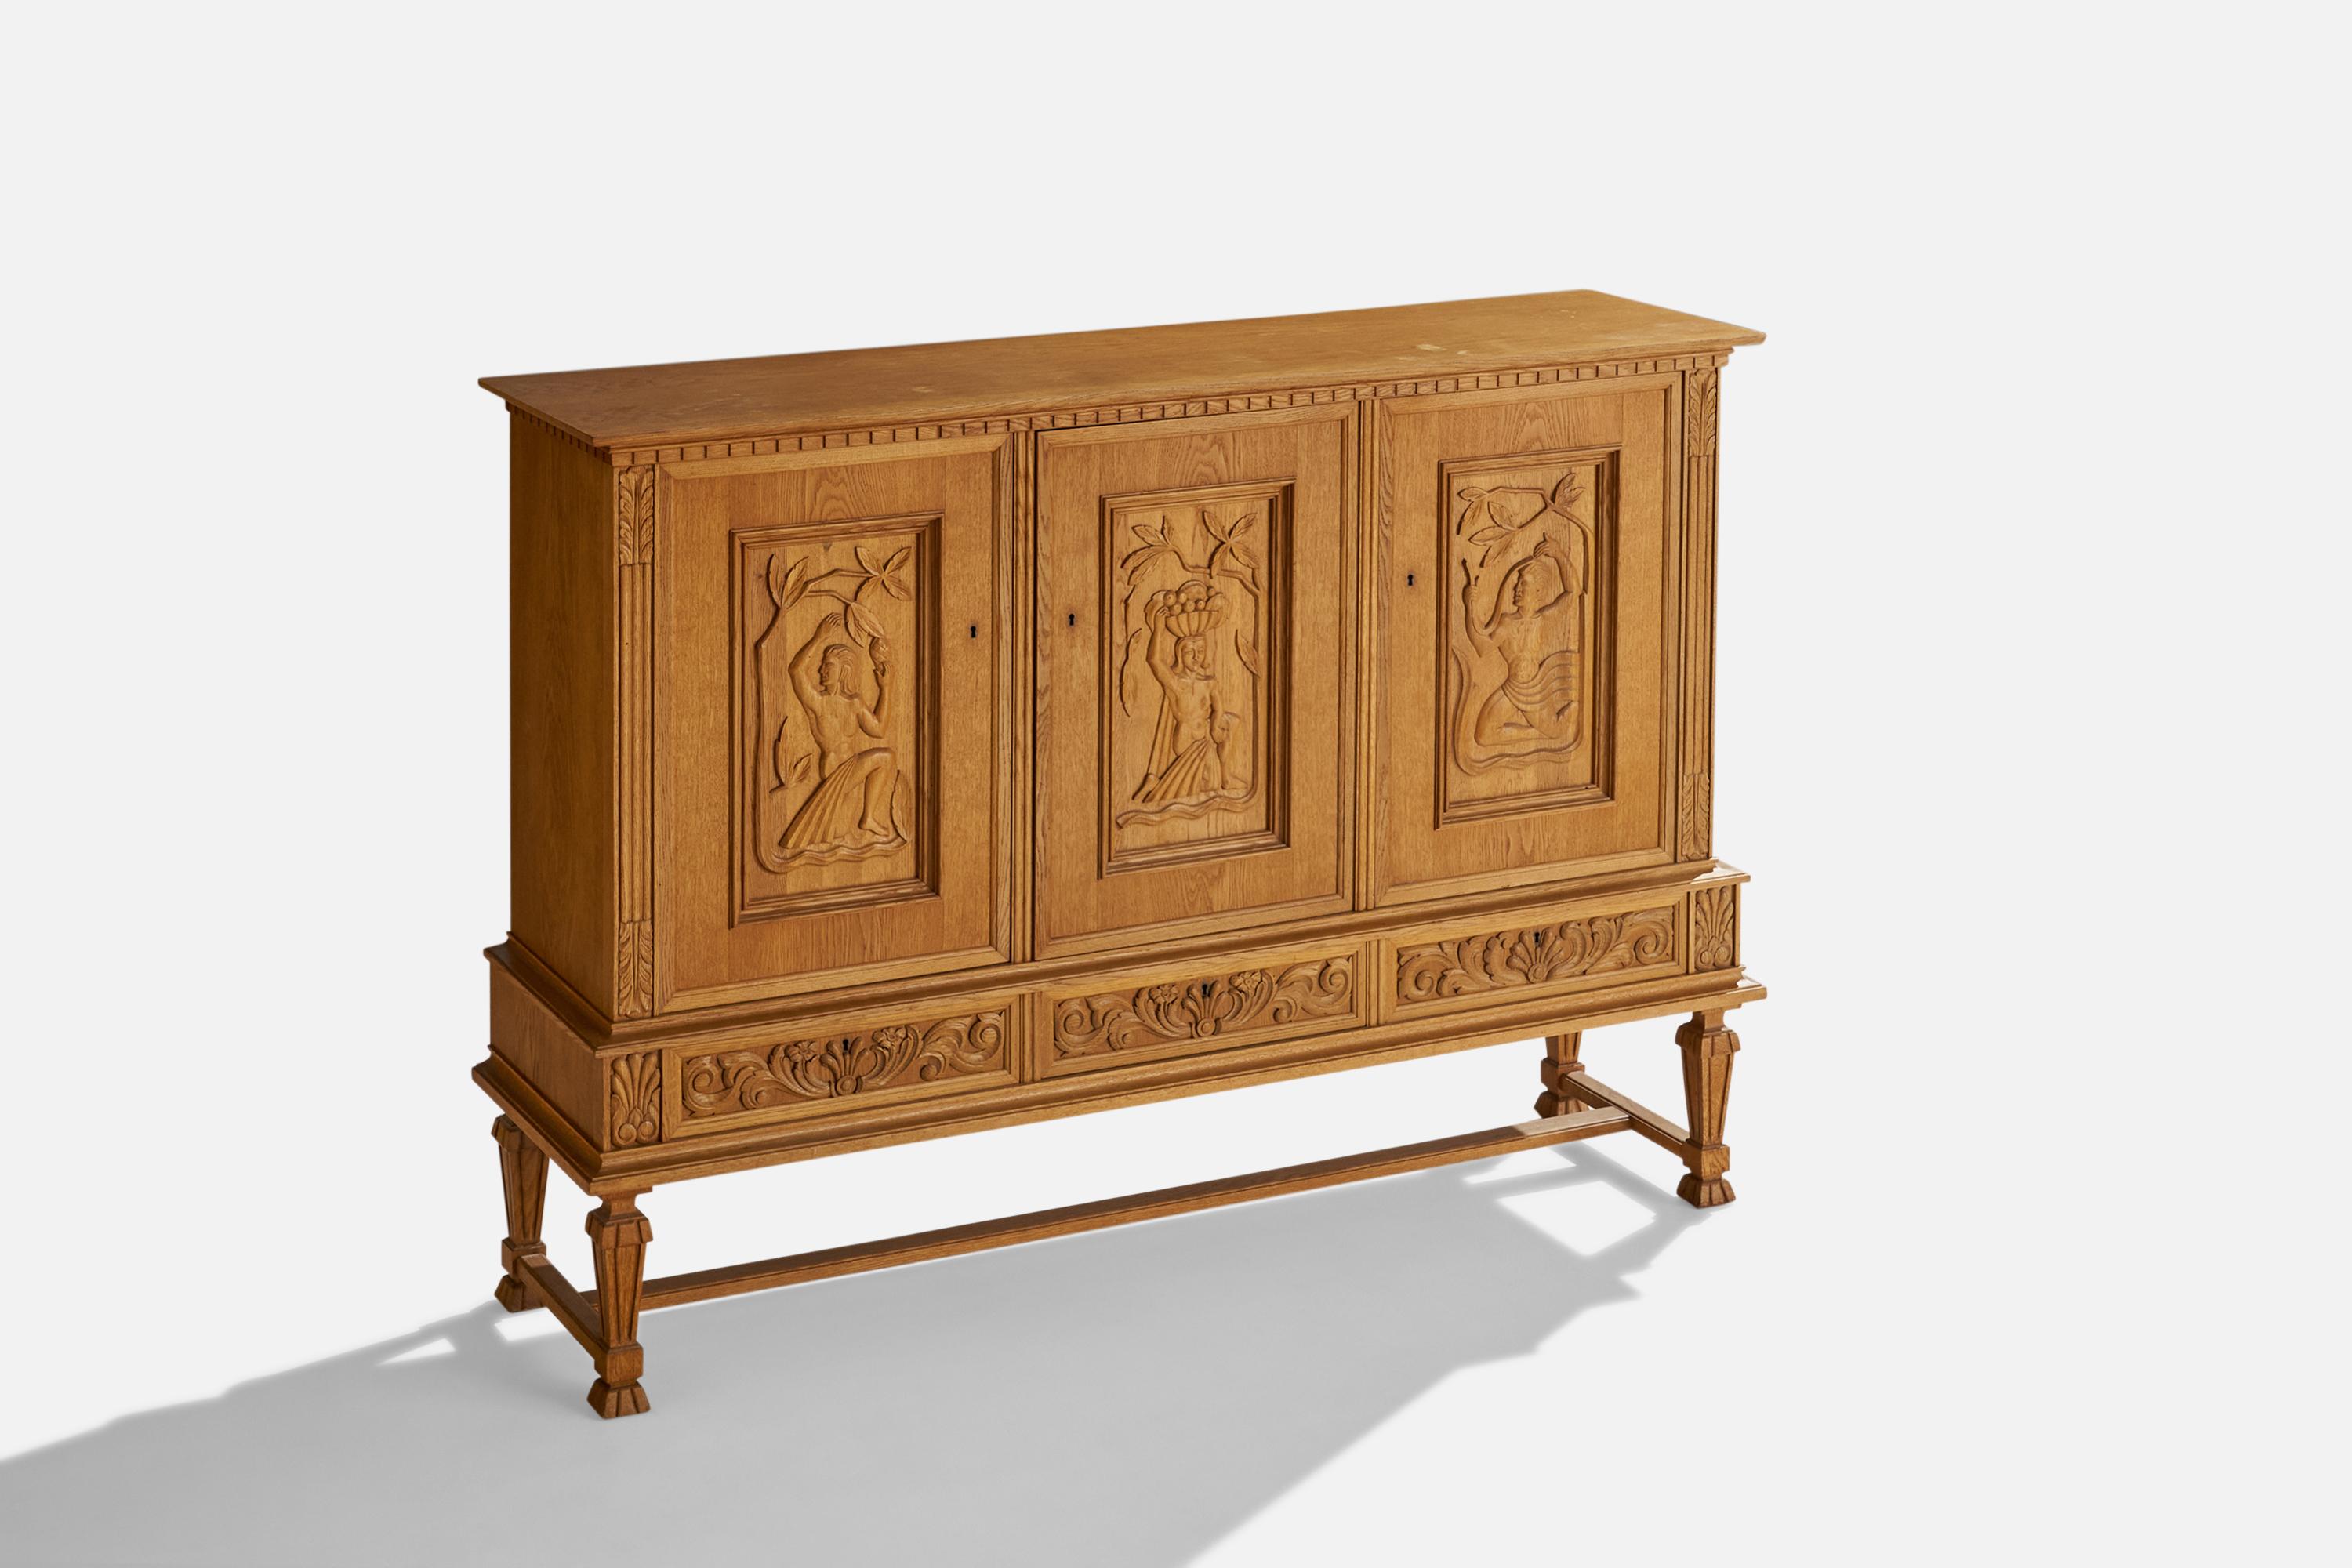 An oak cabinet with hand-carved details designed and produced in Sweden, c. 1920s.